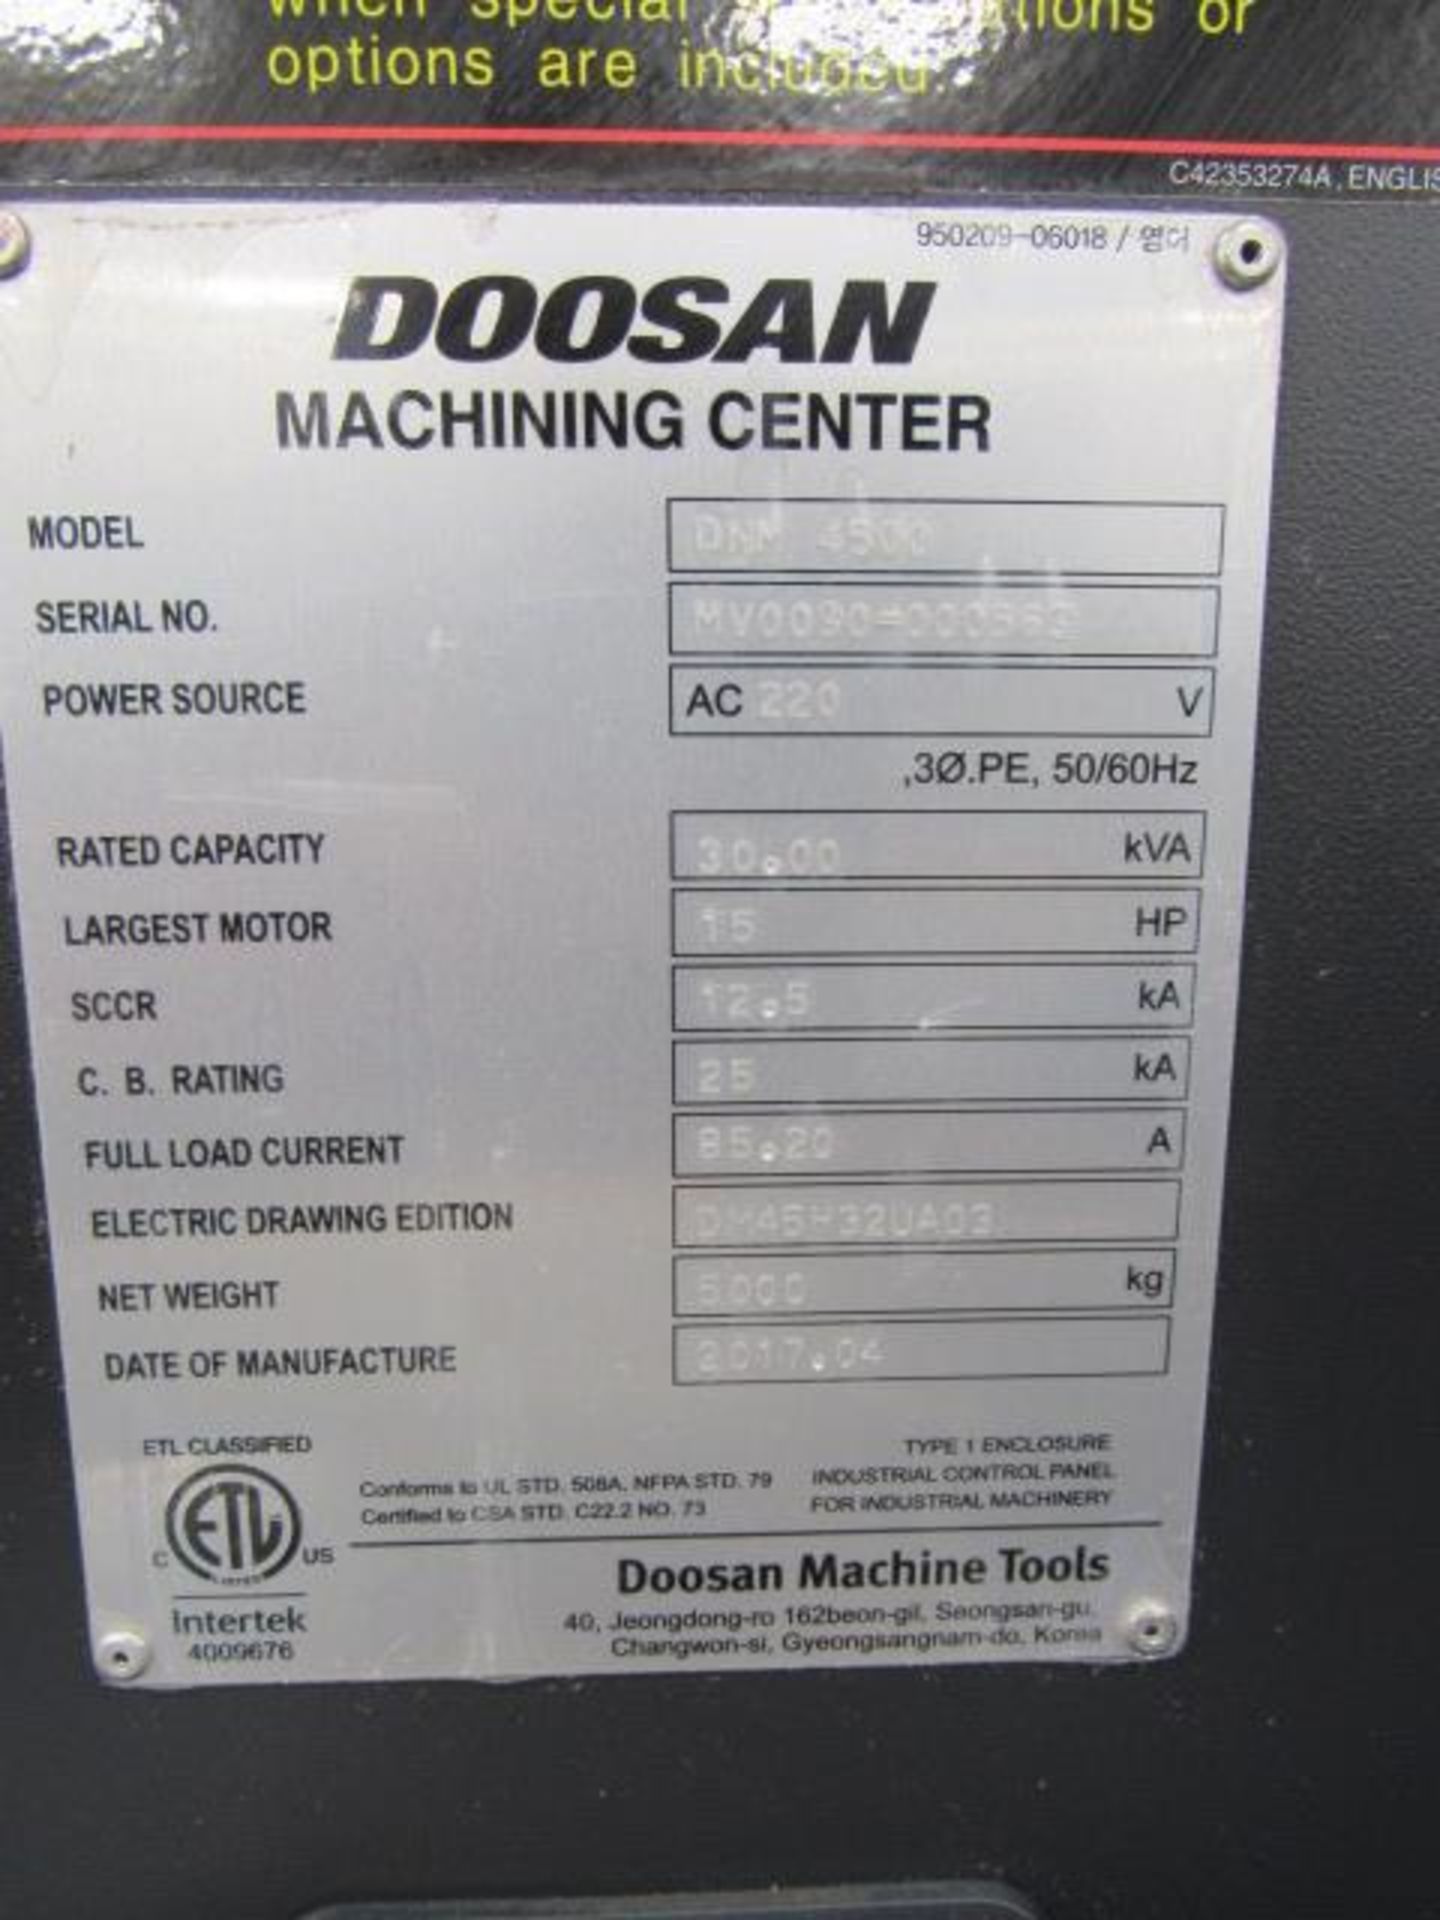 Doosan DNM 4500 CNC Vertical Machining Center with 39.4'' x 17.7'' Tables, Big Plus #40, Spindle - Image 7 of 8